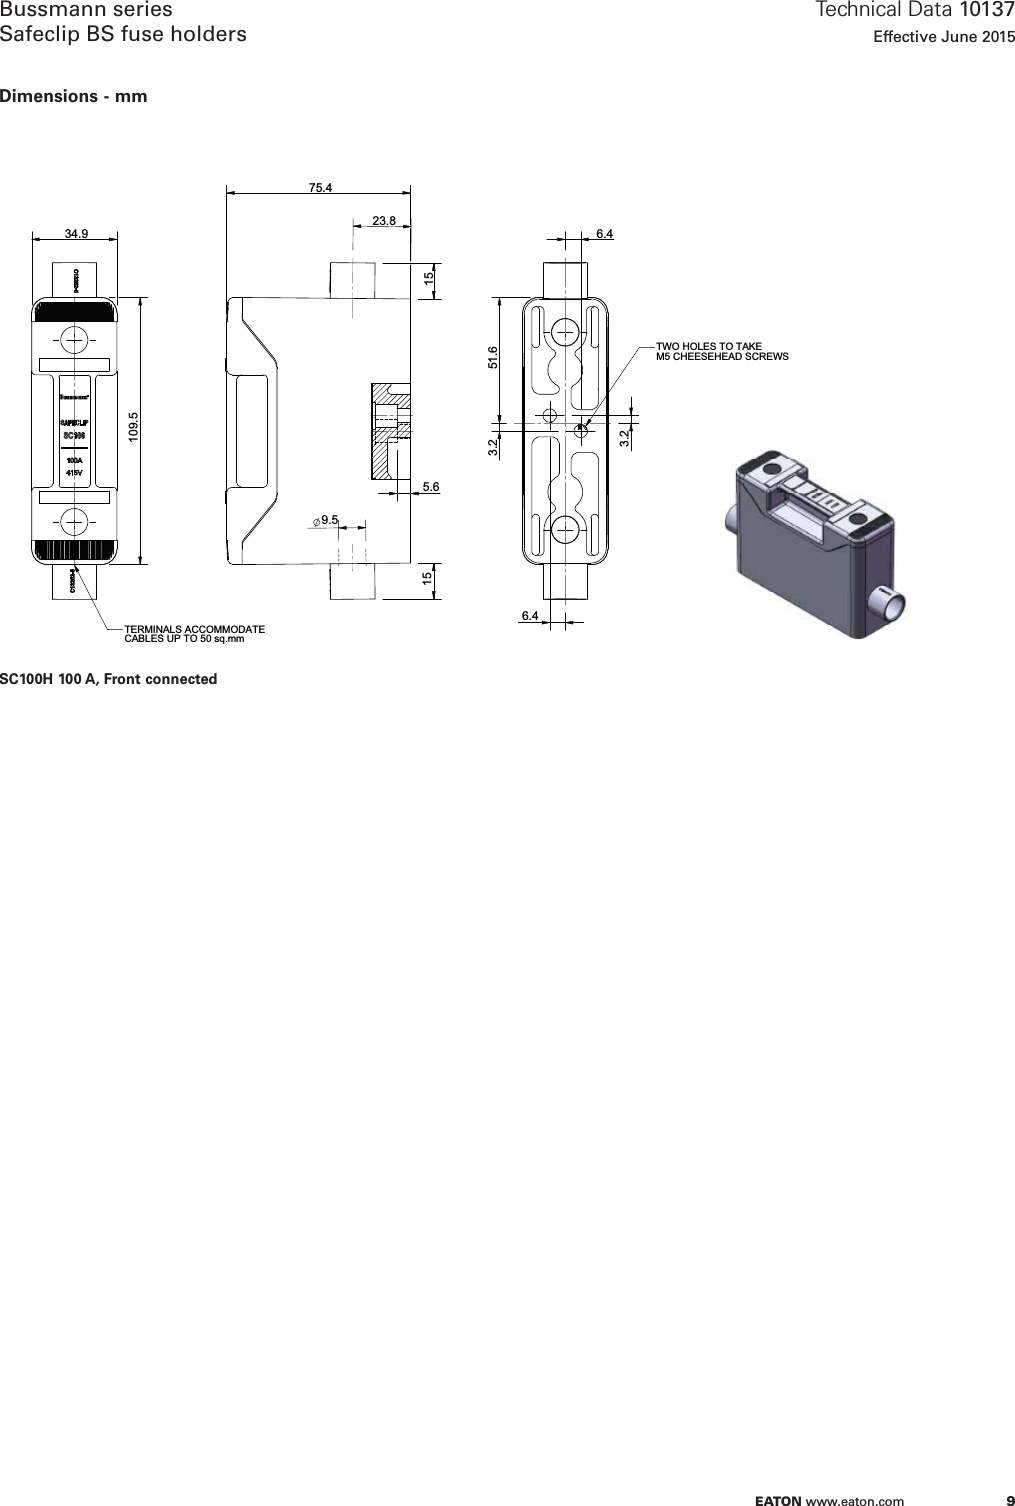 Page 9 of 10 - Bus-iec-ds-10137-safeclipfuseholders  Brochure